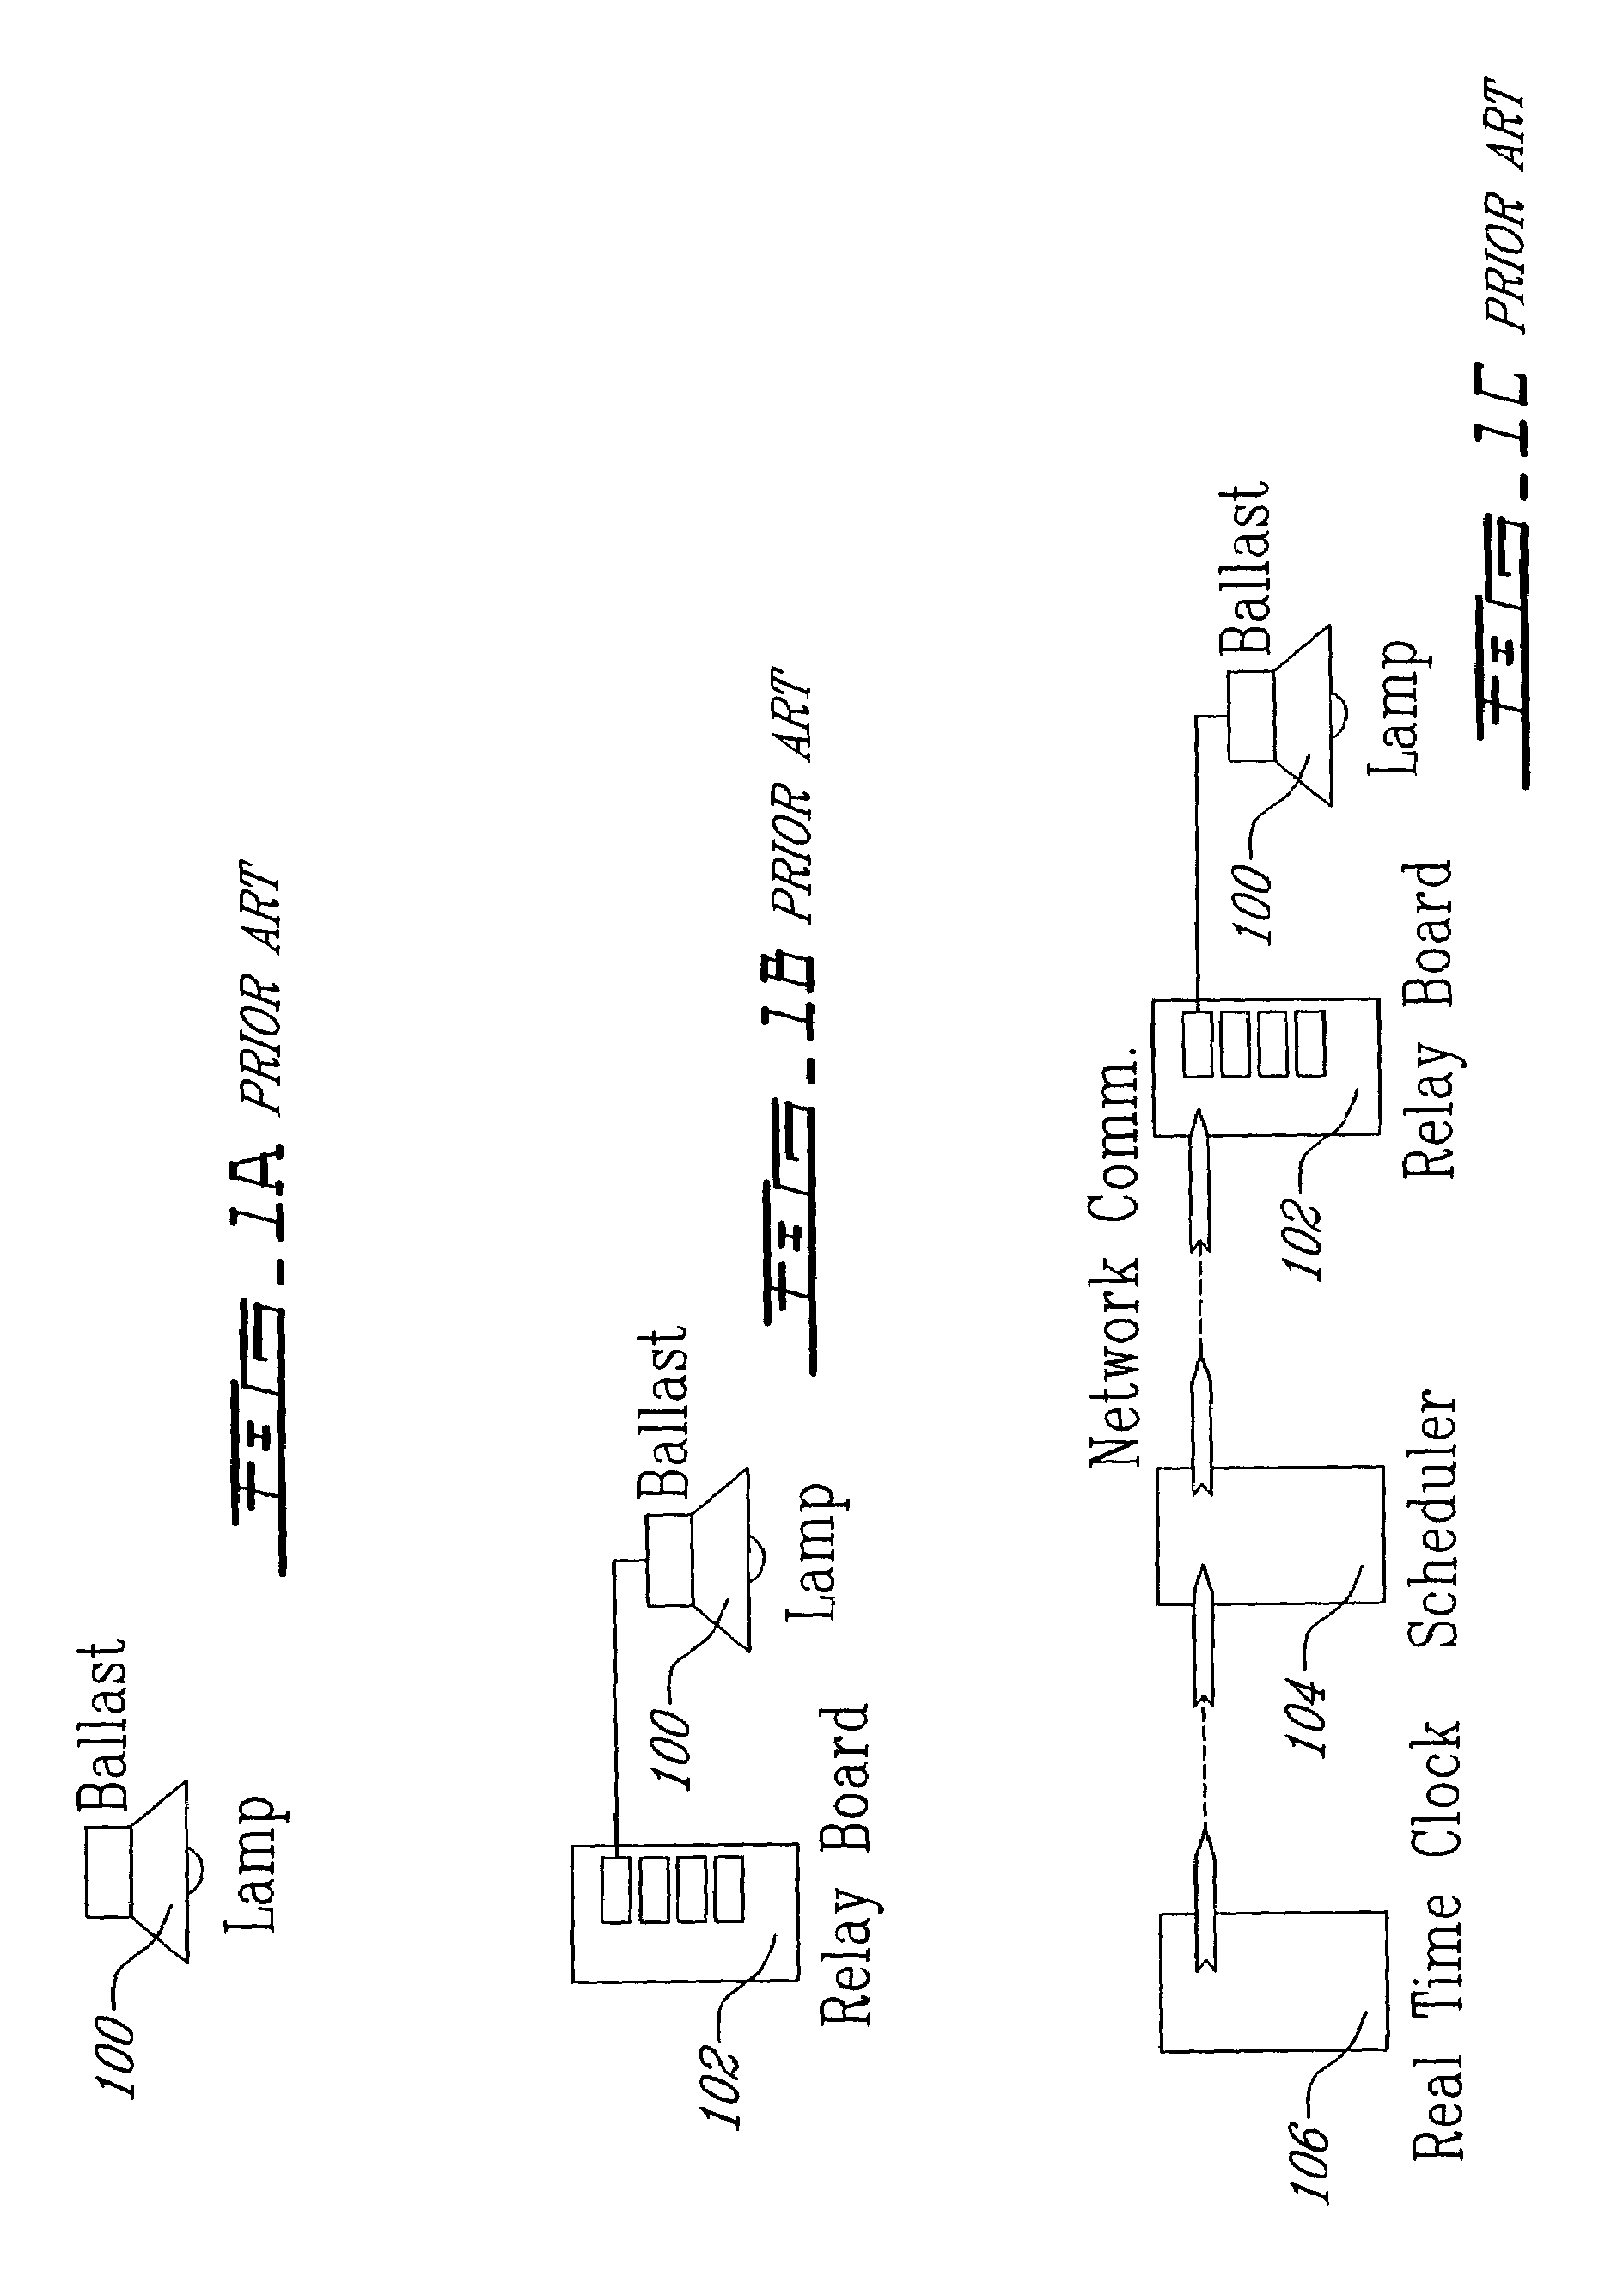 Distributed dimmable lighting control system and method